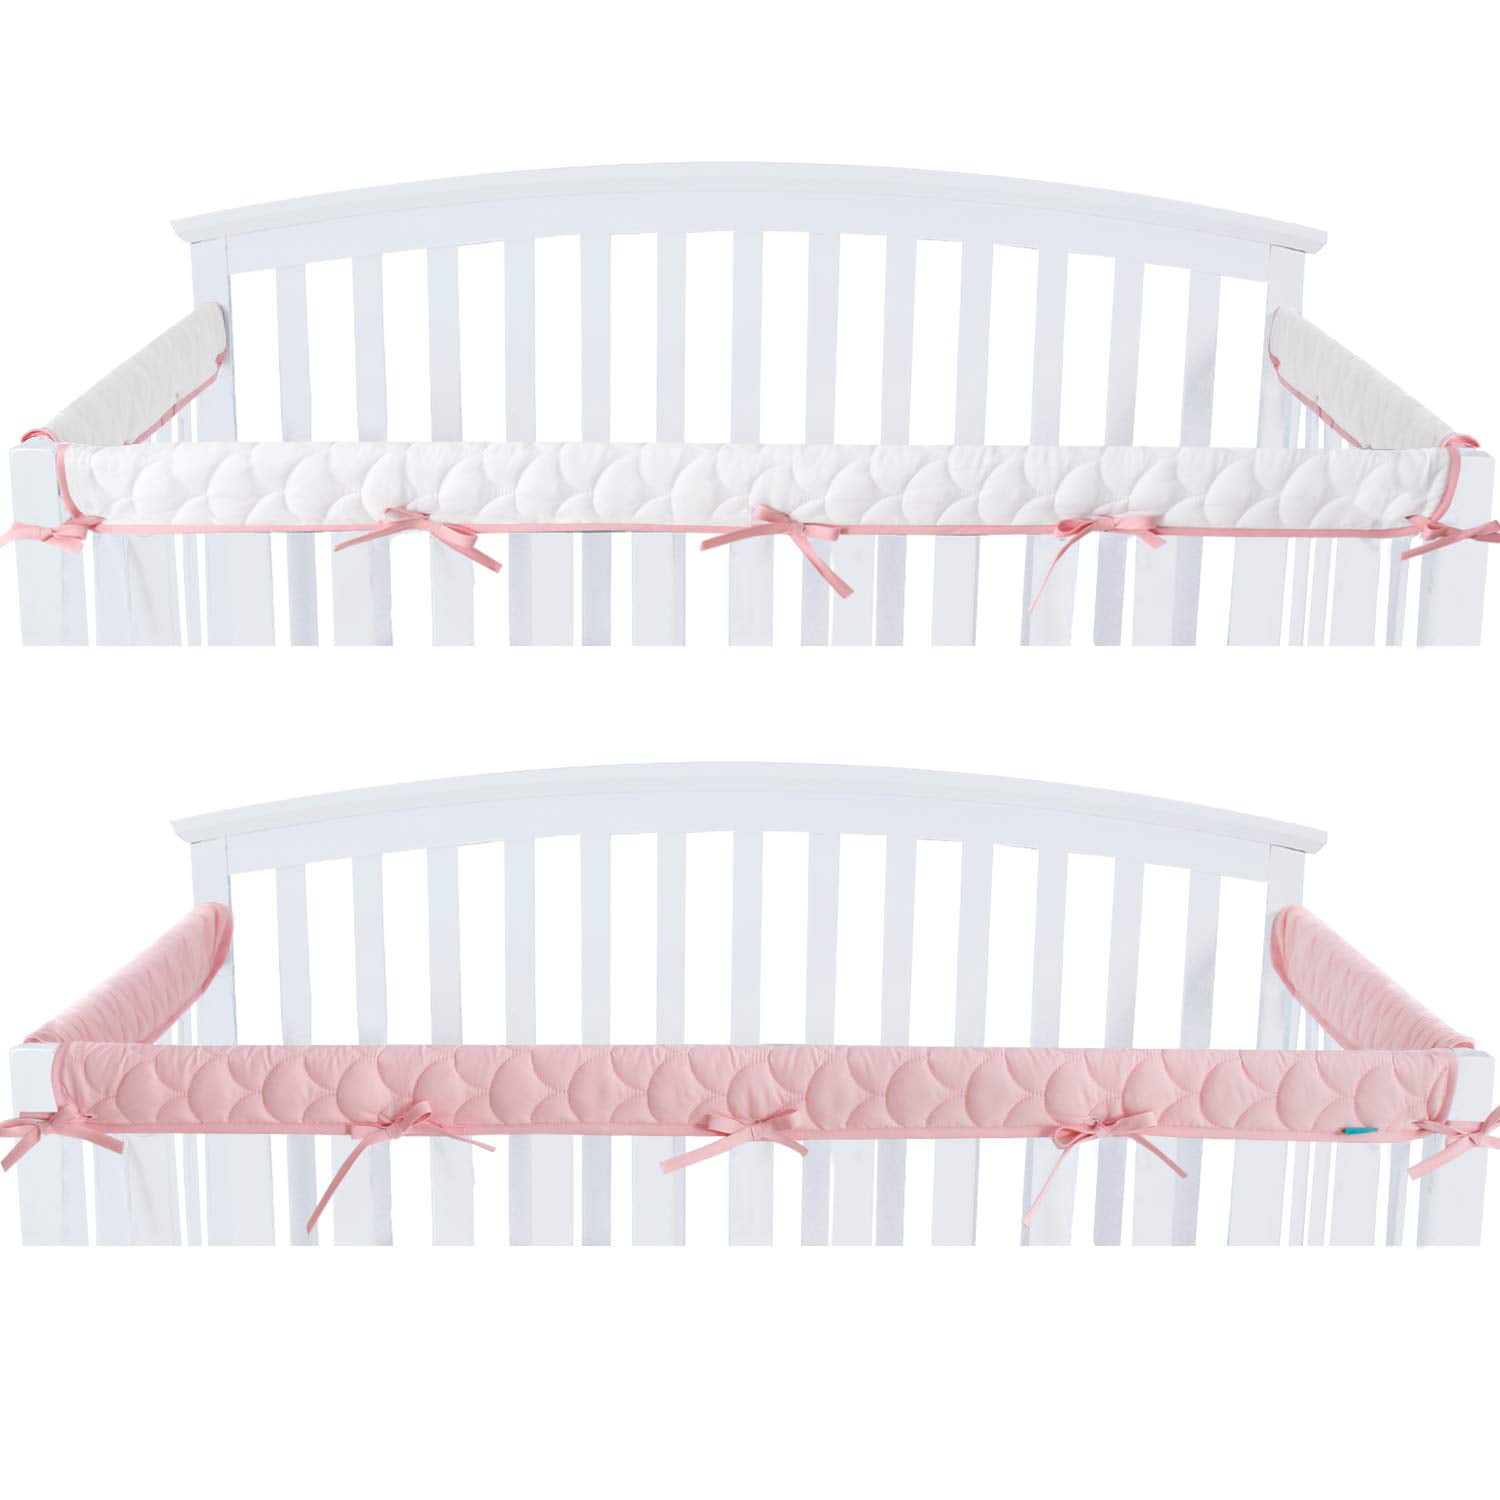 Biloban Standard Quilted Crib Rail Cover Protector Safe Teething Guard Wrap , 3 Piece, Pink